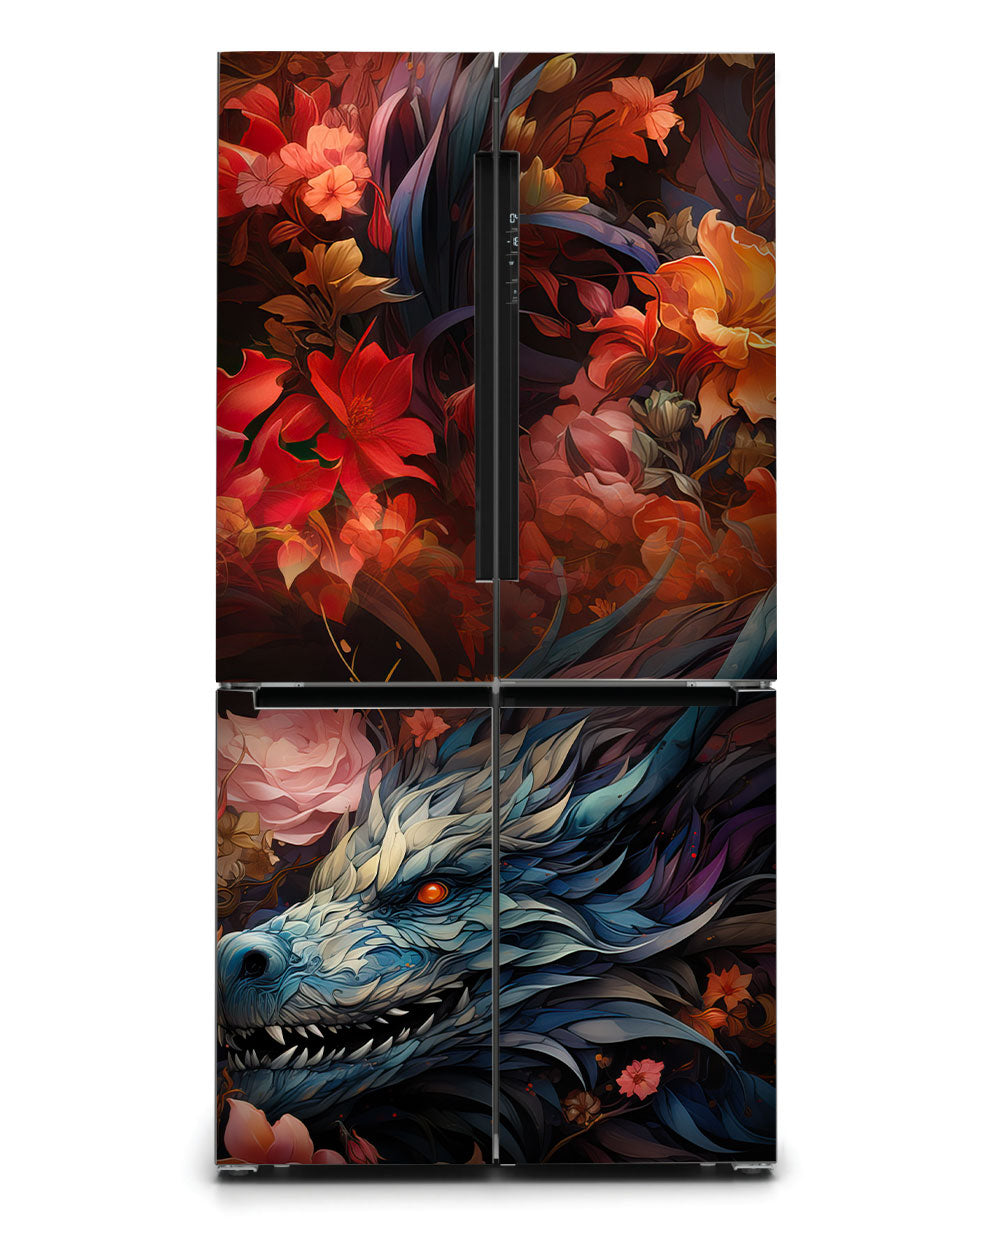 Black dragon and flowers